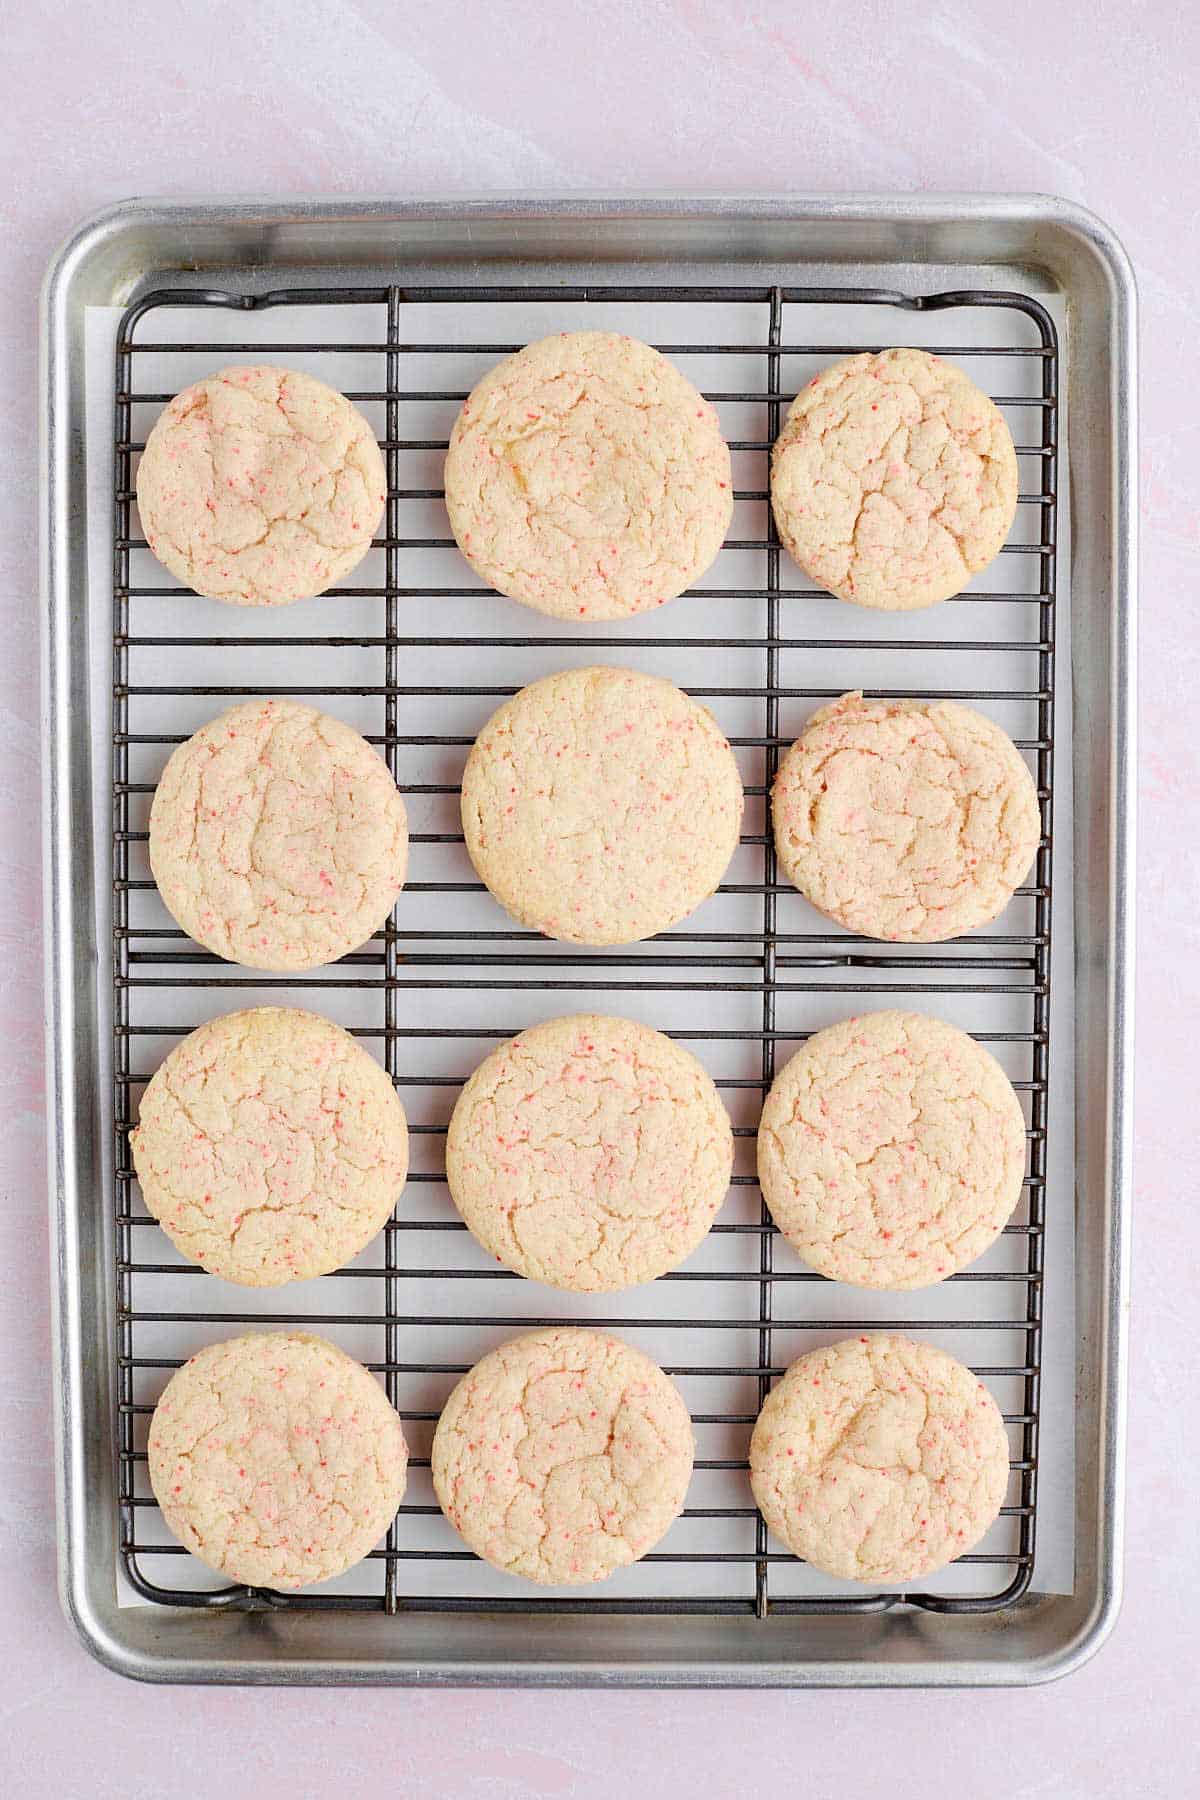 Baked cherry chip cake mix cookies cooling on a wire rack.